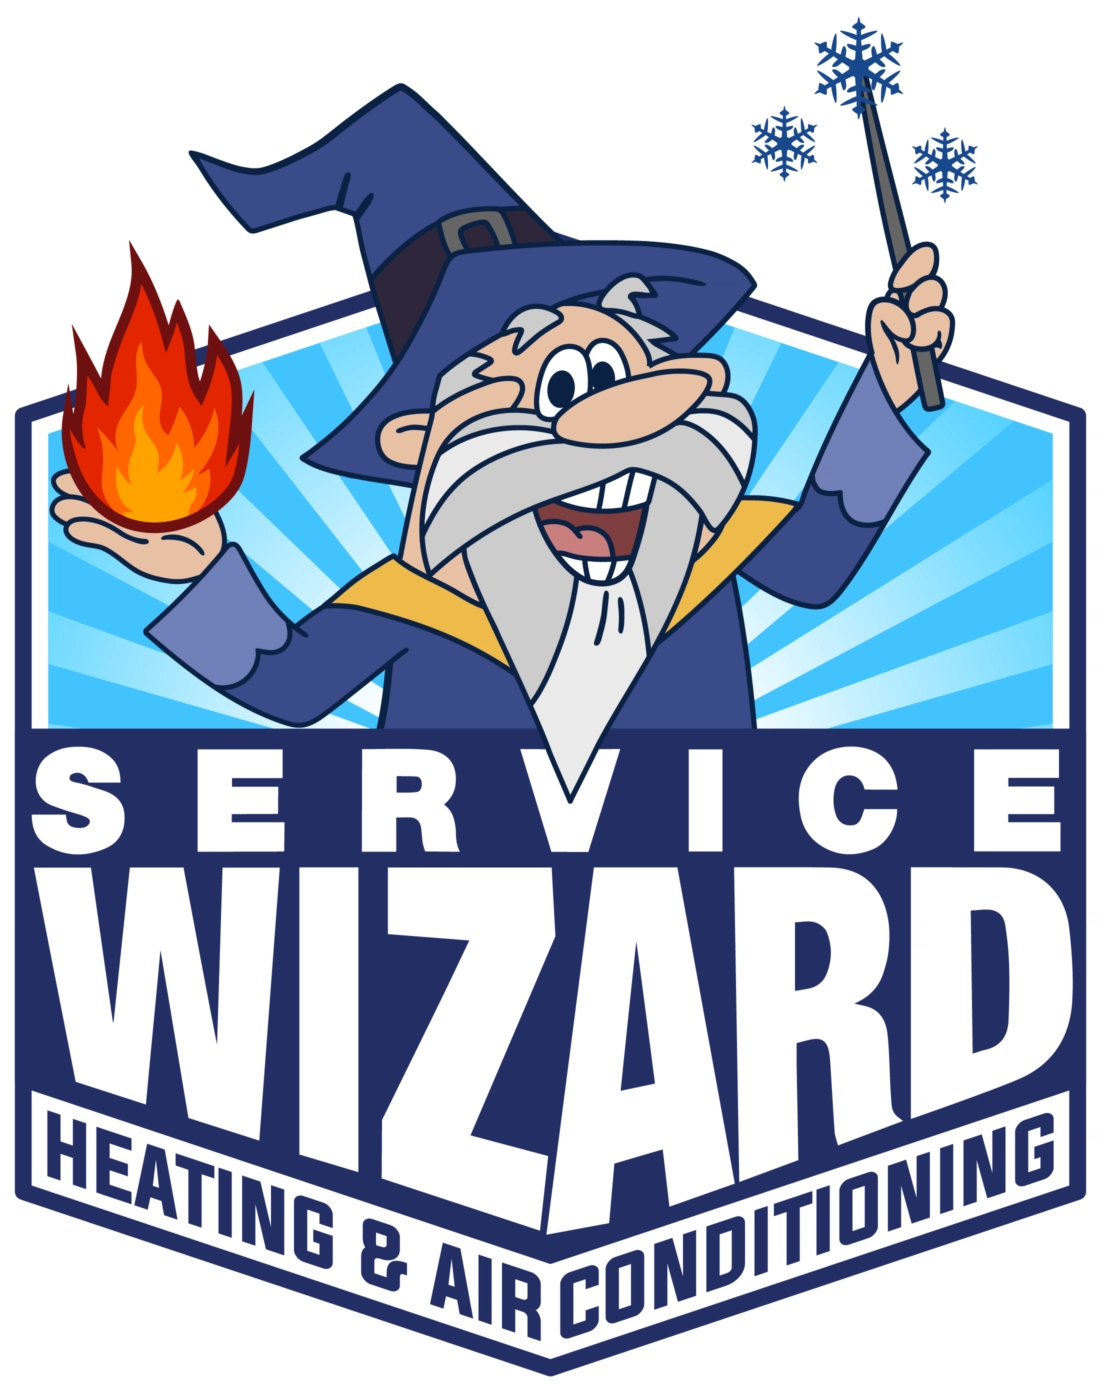 Service Wizard Heating & Air Conditioning Logo